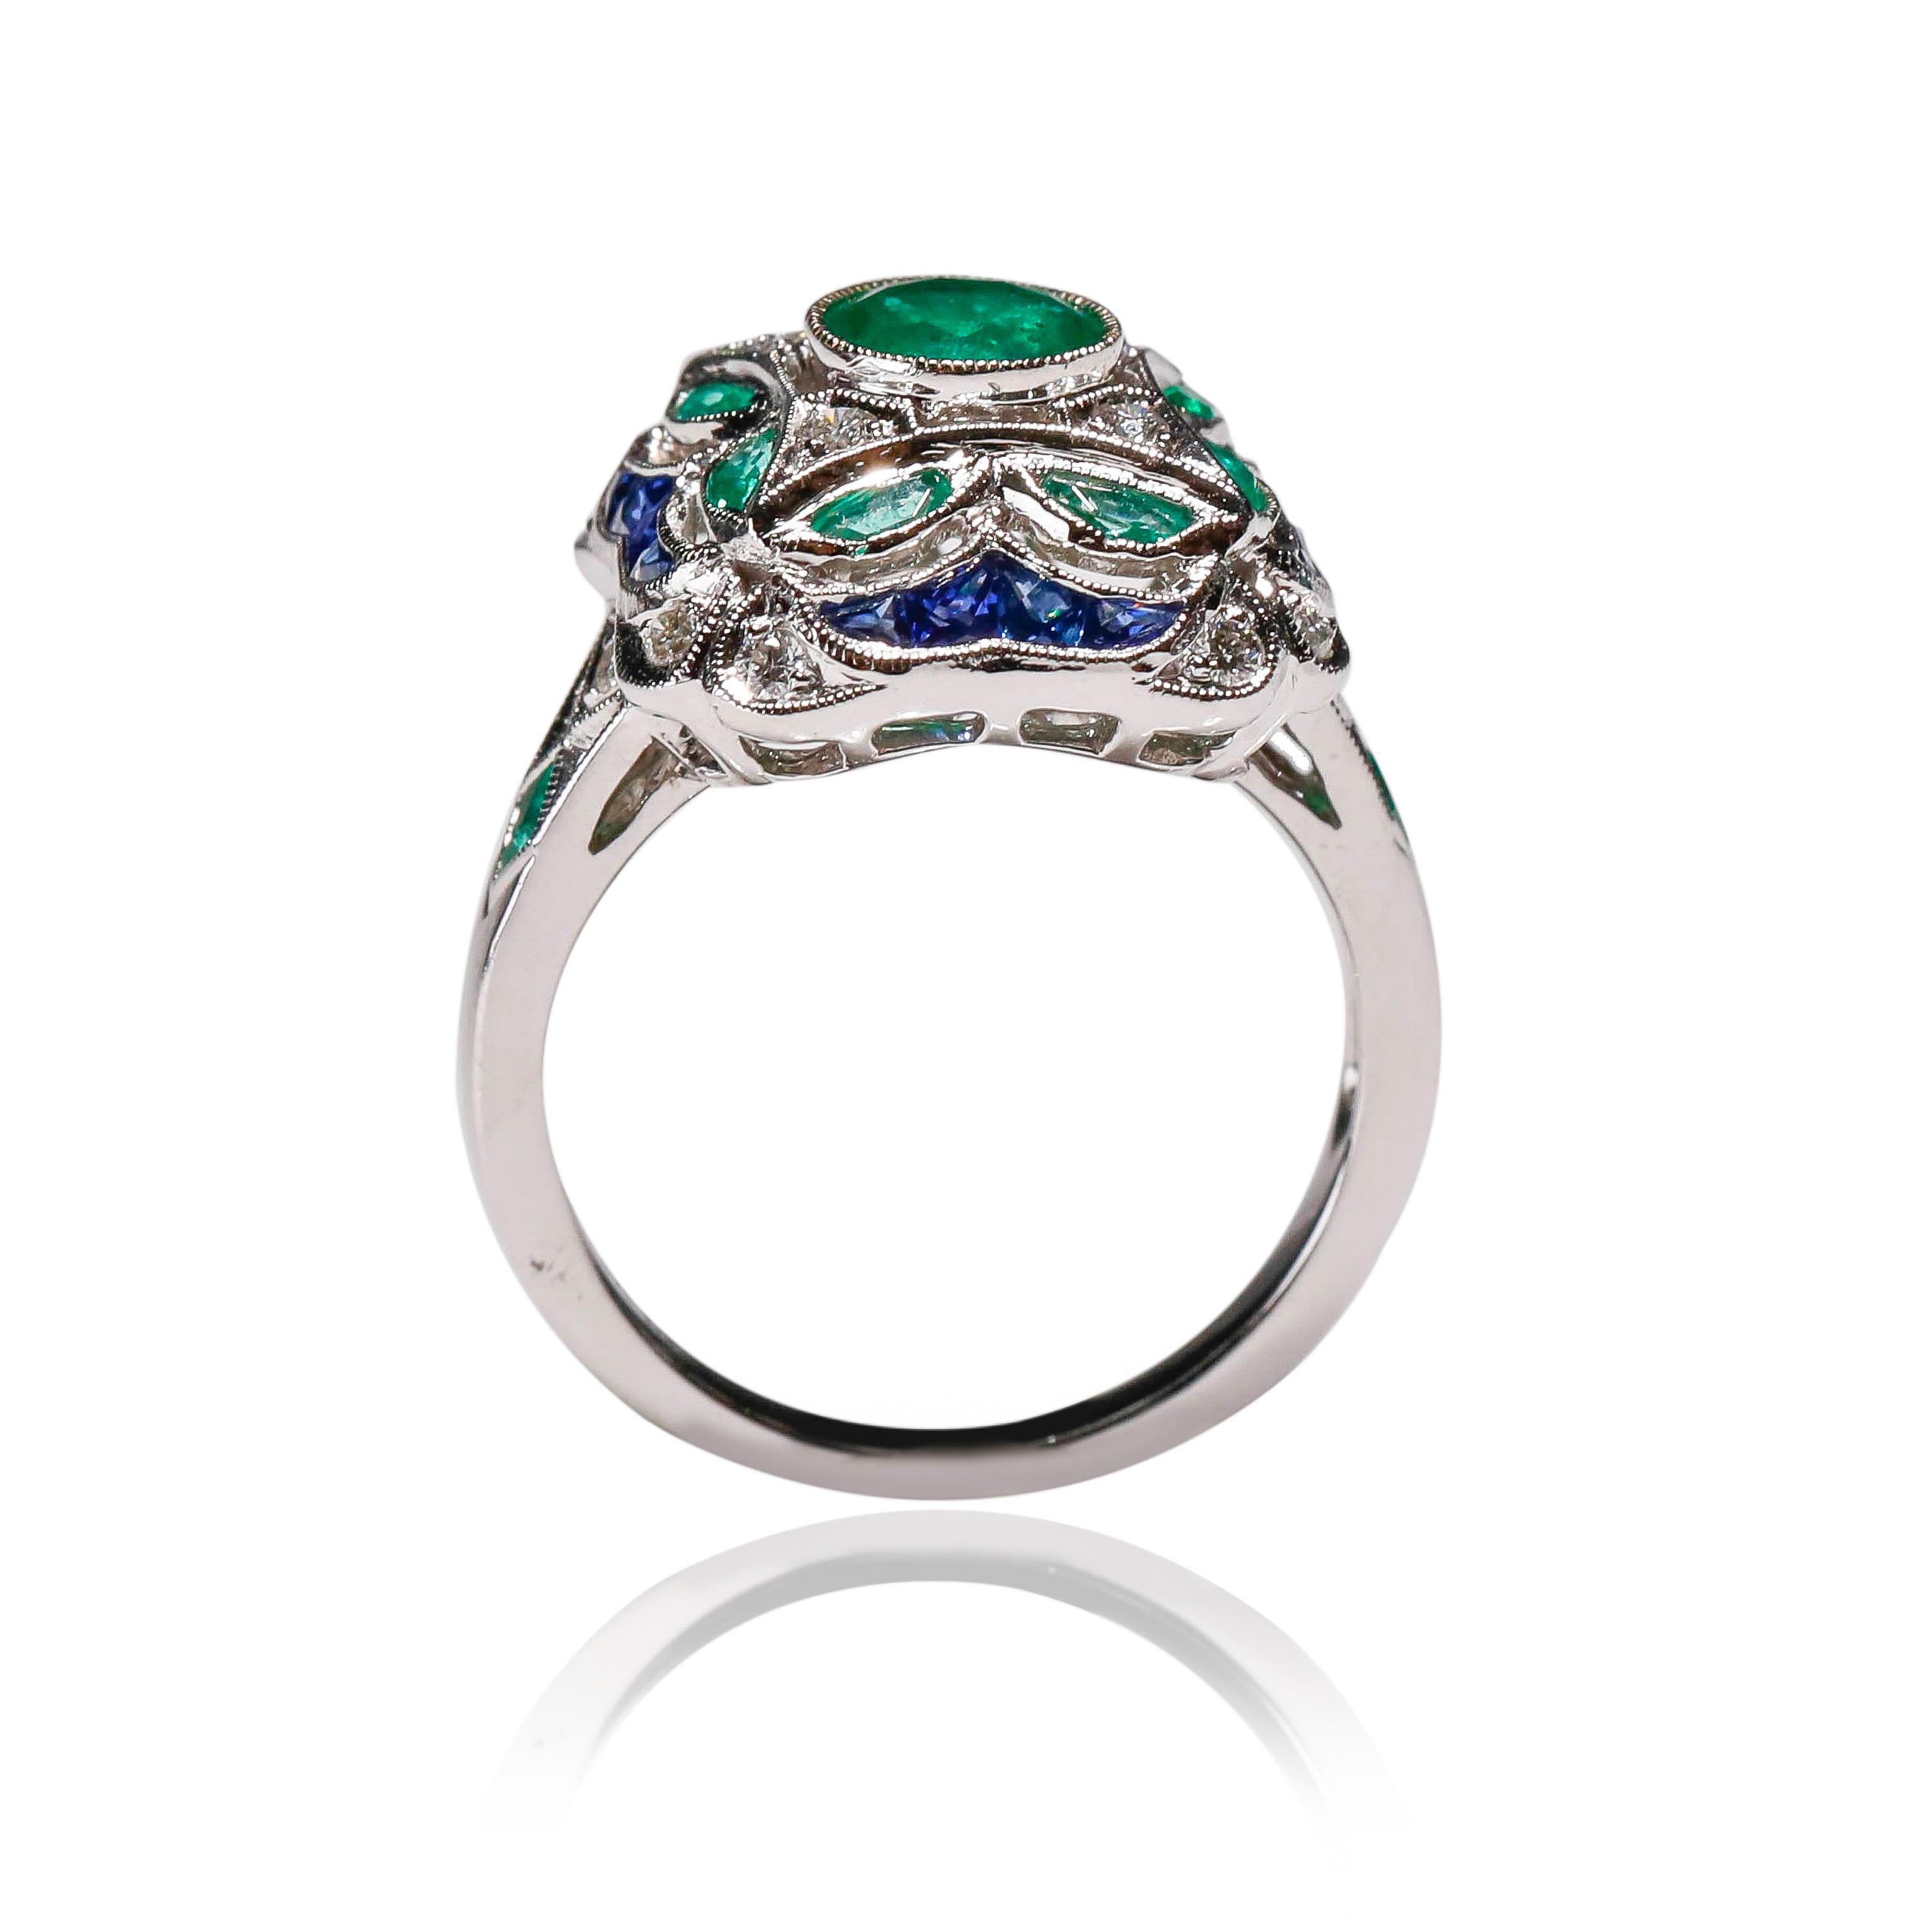 18 Kt White Gold 1.17 Ct Diamond 1 Carat Sapphire 1.1 ct Emerald Cocktail Ring

Crafted in 18 kt White Gold, this Unique design showcases an Emerald 1.21 TCW multi-shaped with diamond and blue sapphire, set in a Cocktail Ring with mesmerizing